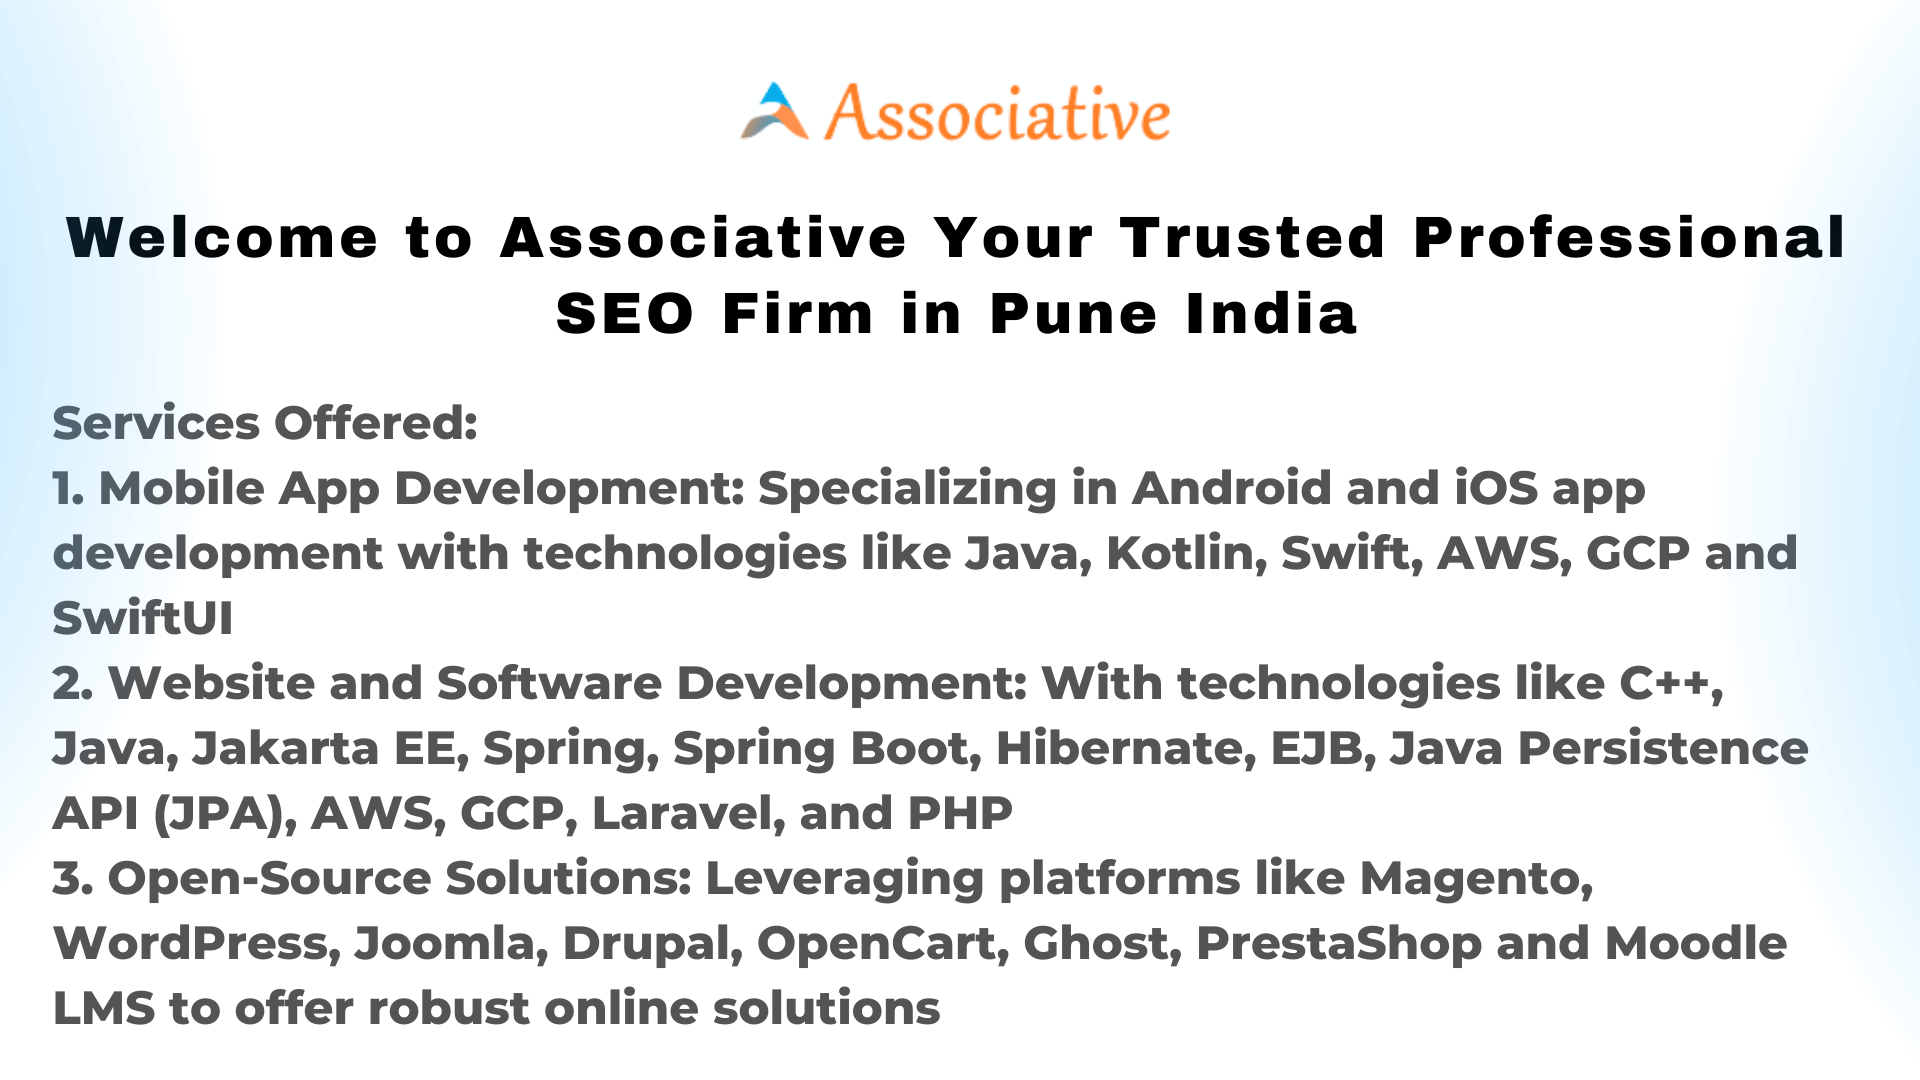 Welcome to Associative Your Trusted Professional SEO Firm in Pune India